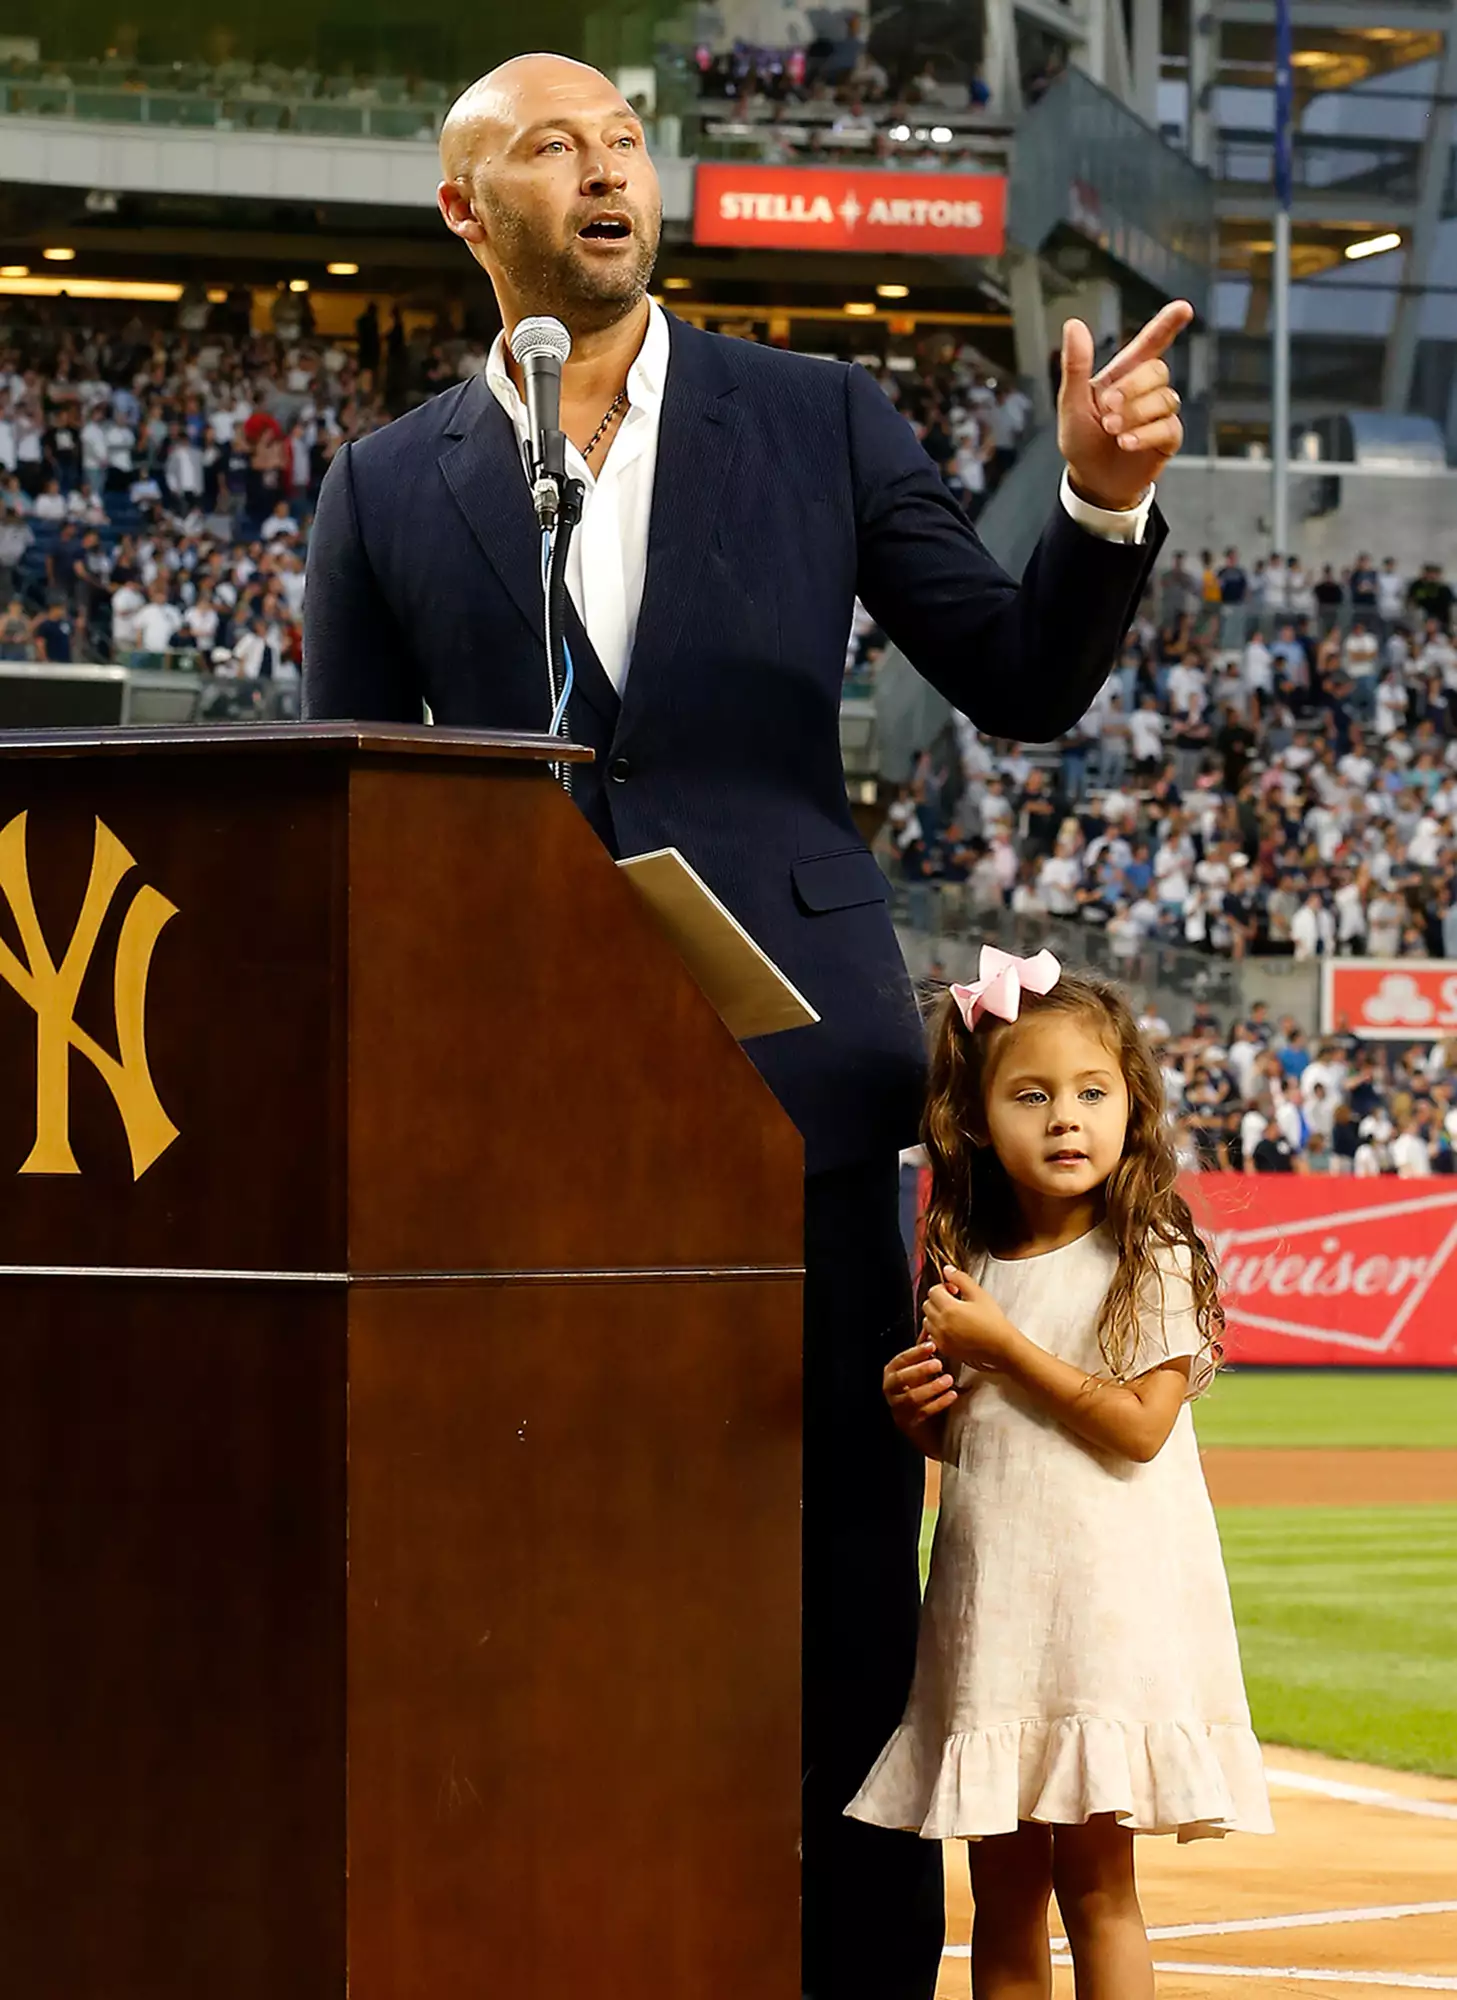 Derek Jeter speaks to the fans alongside his daughter Story as he is honored by the New York Yankees before a game against the Tampa Bay Rays at Yankee Stadium on September 09, 2022 in the Bronx borough of New York City